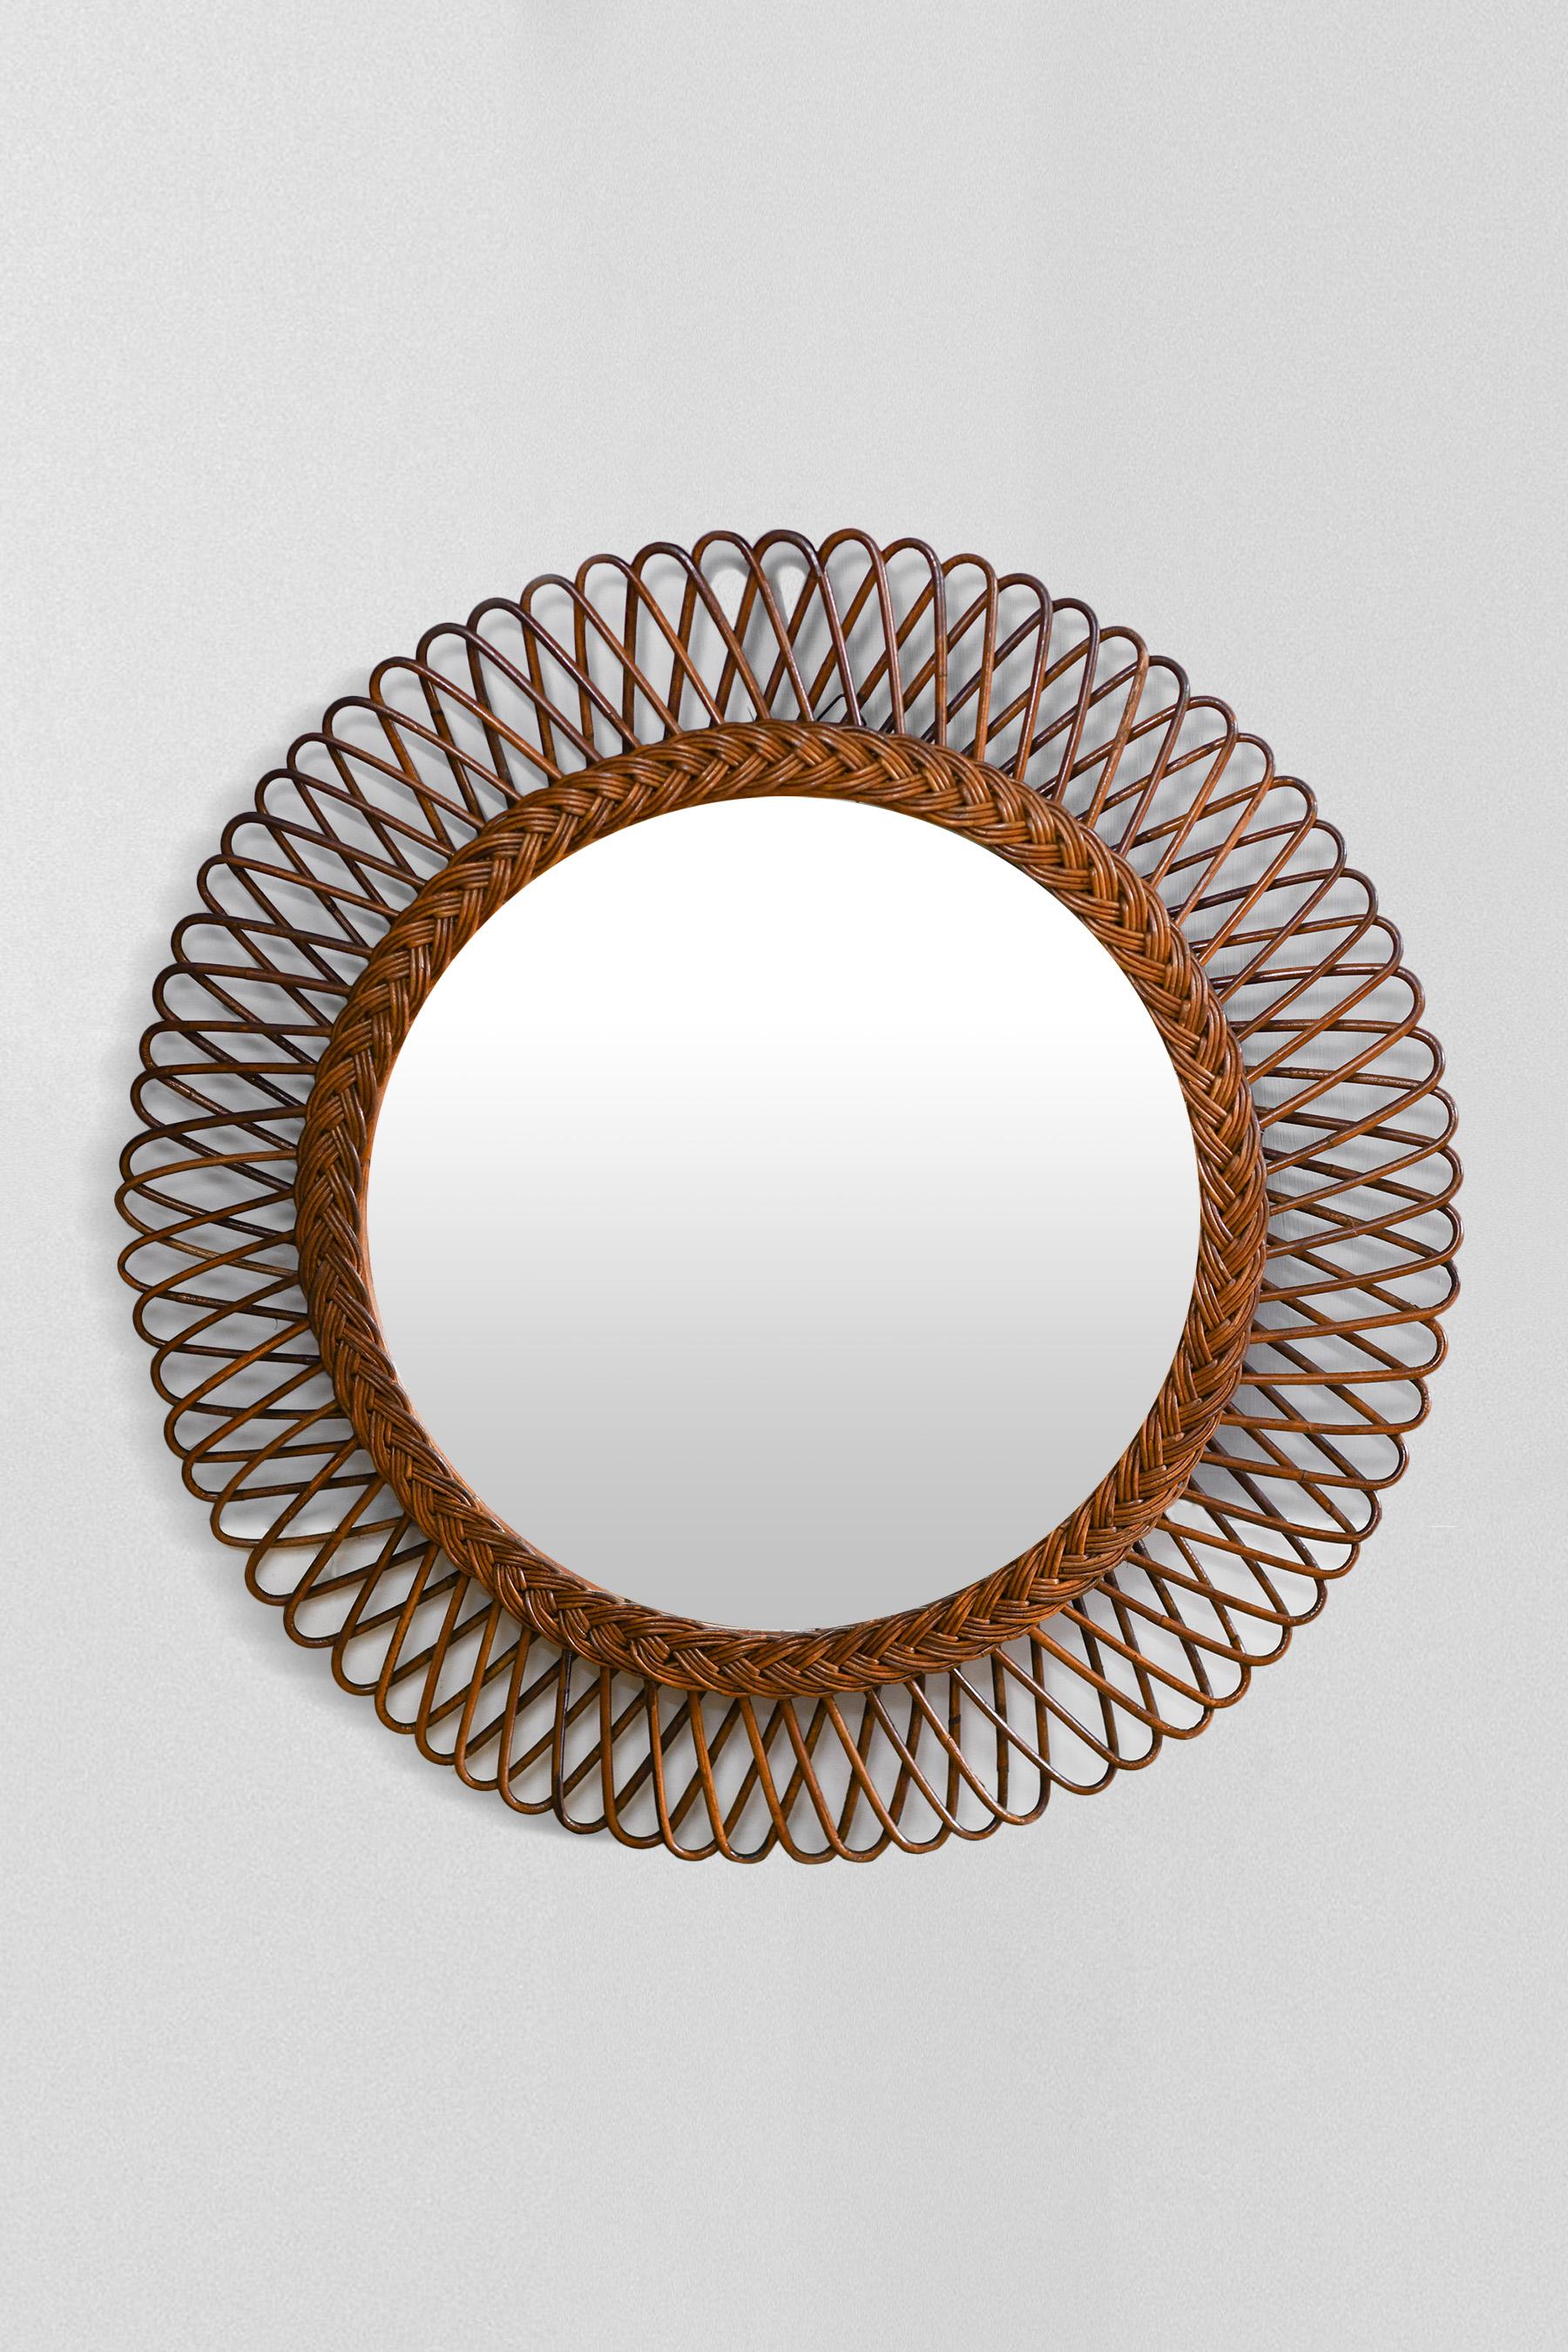 Circular mirror in hand-woven rush, Italy 1970.
Product details
Dimensions: 70 W x 70 H x 4 D cm